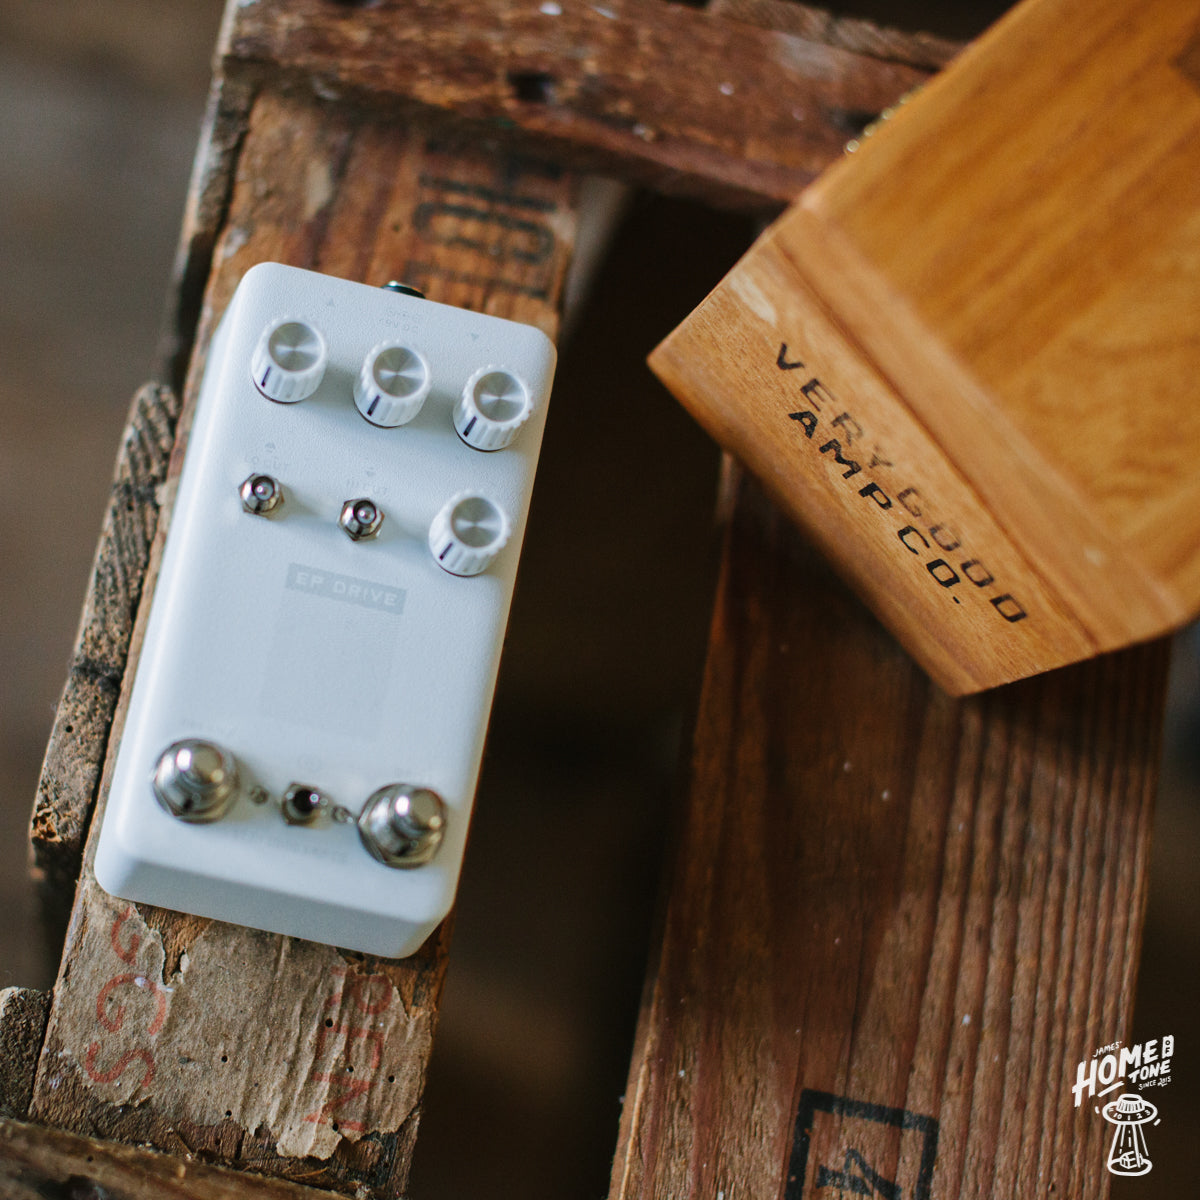 Introducing the Very Good Amp Co, and their EP Drive V3 pedal to the Home of Tone!